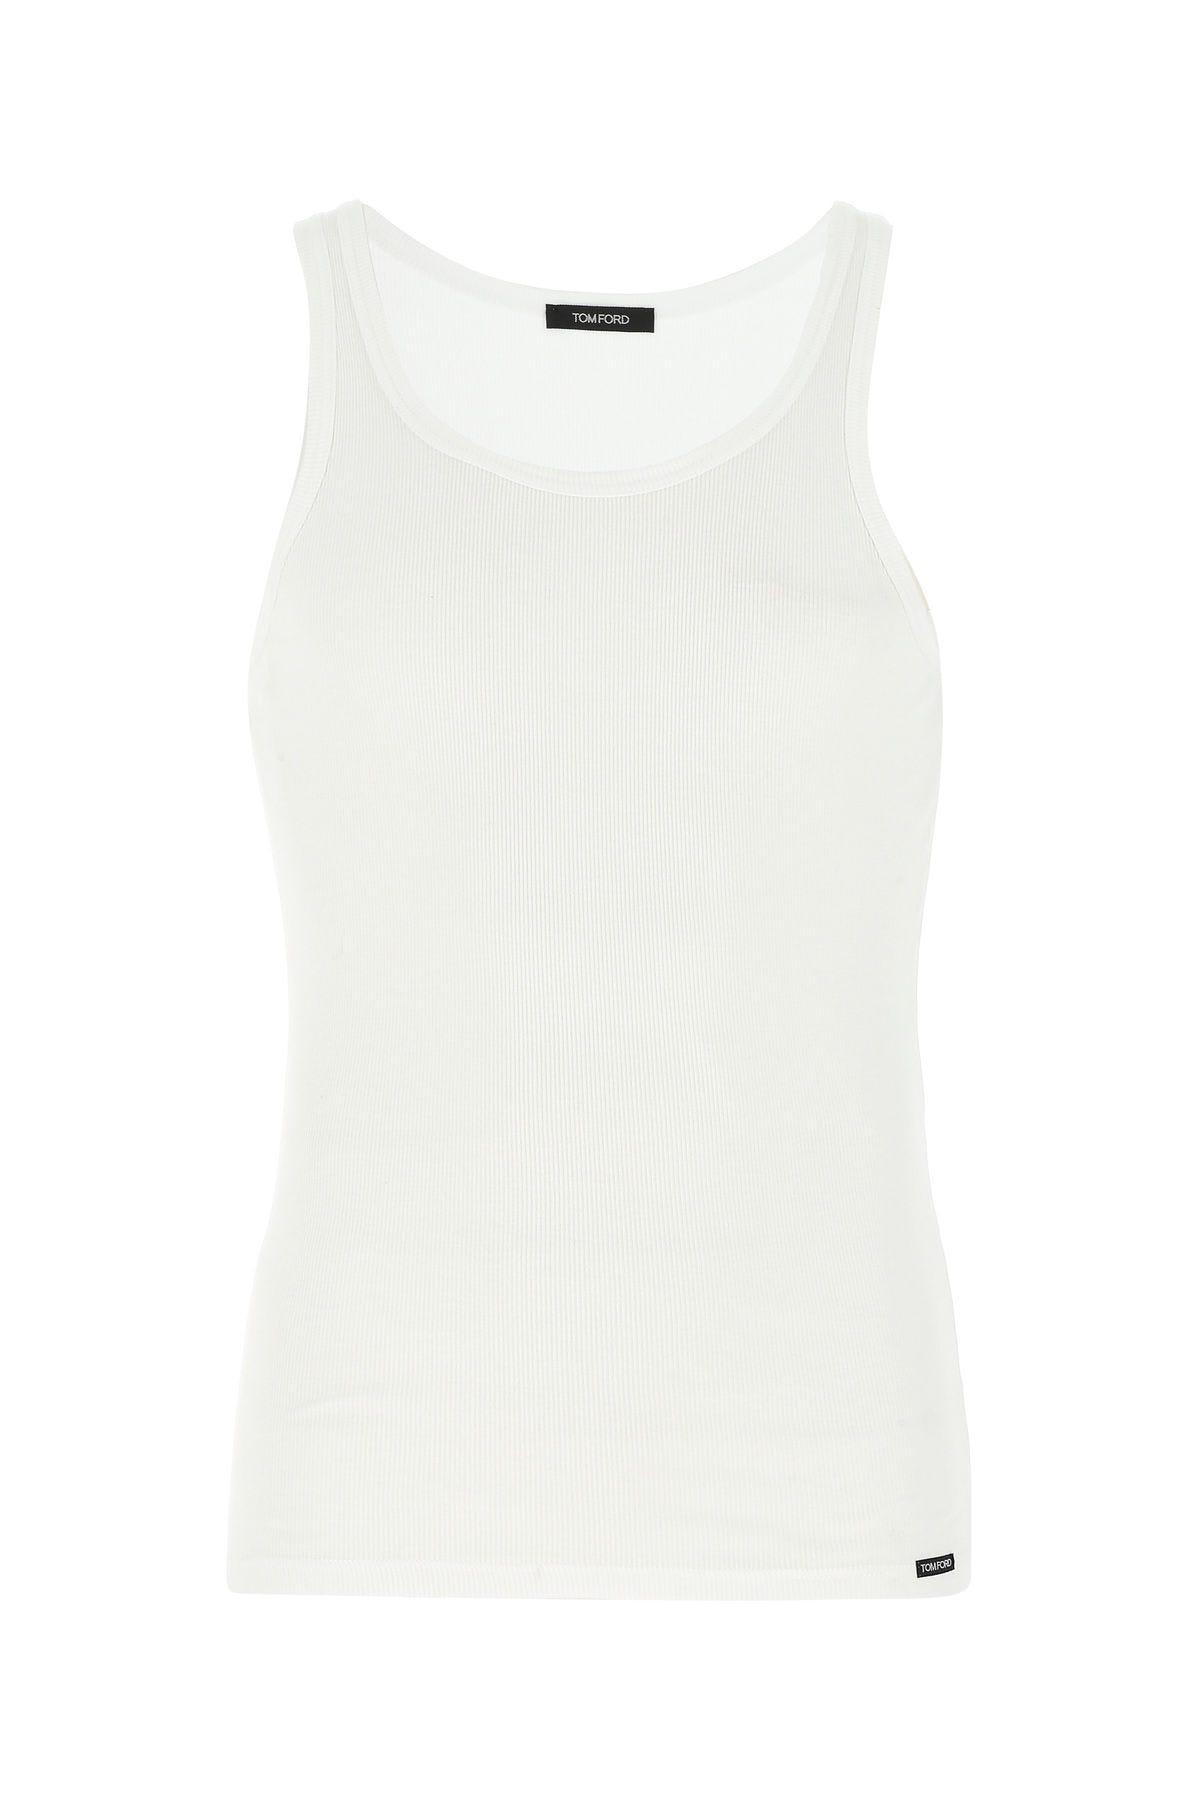 TOM FORD WHITE COTTON AND MODAL TANK TOP